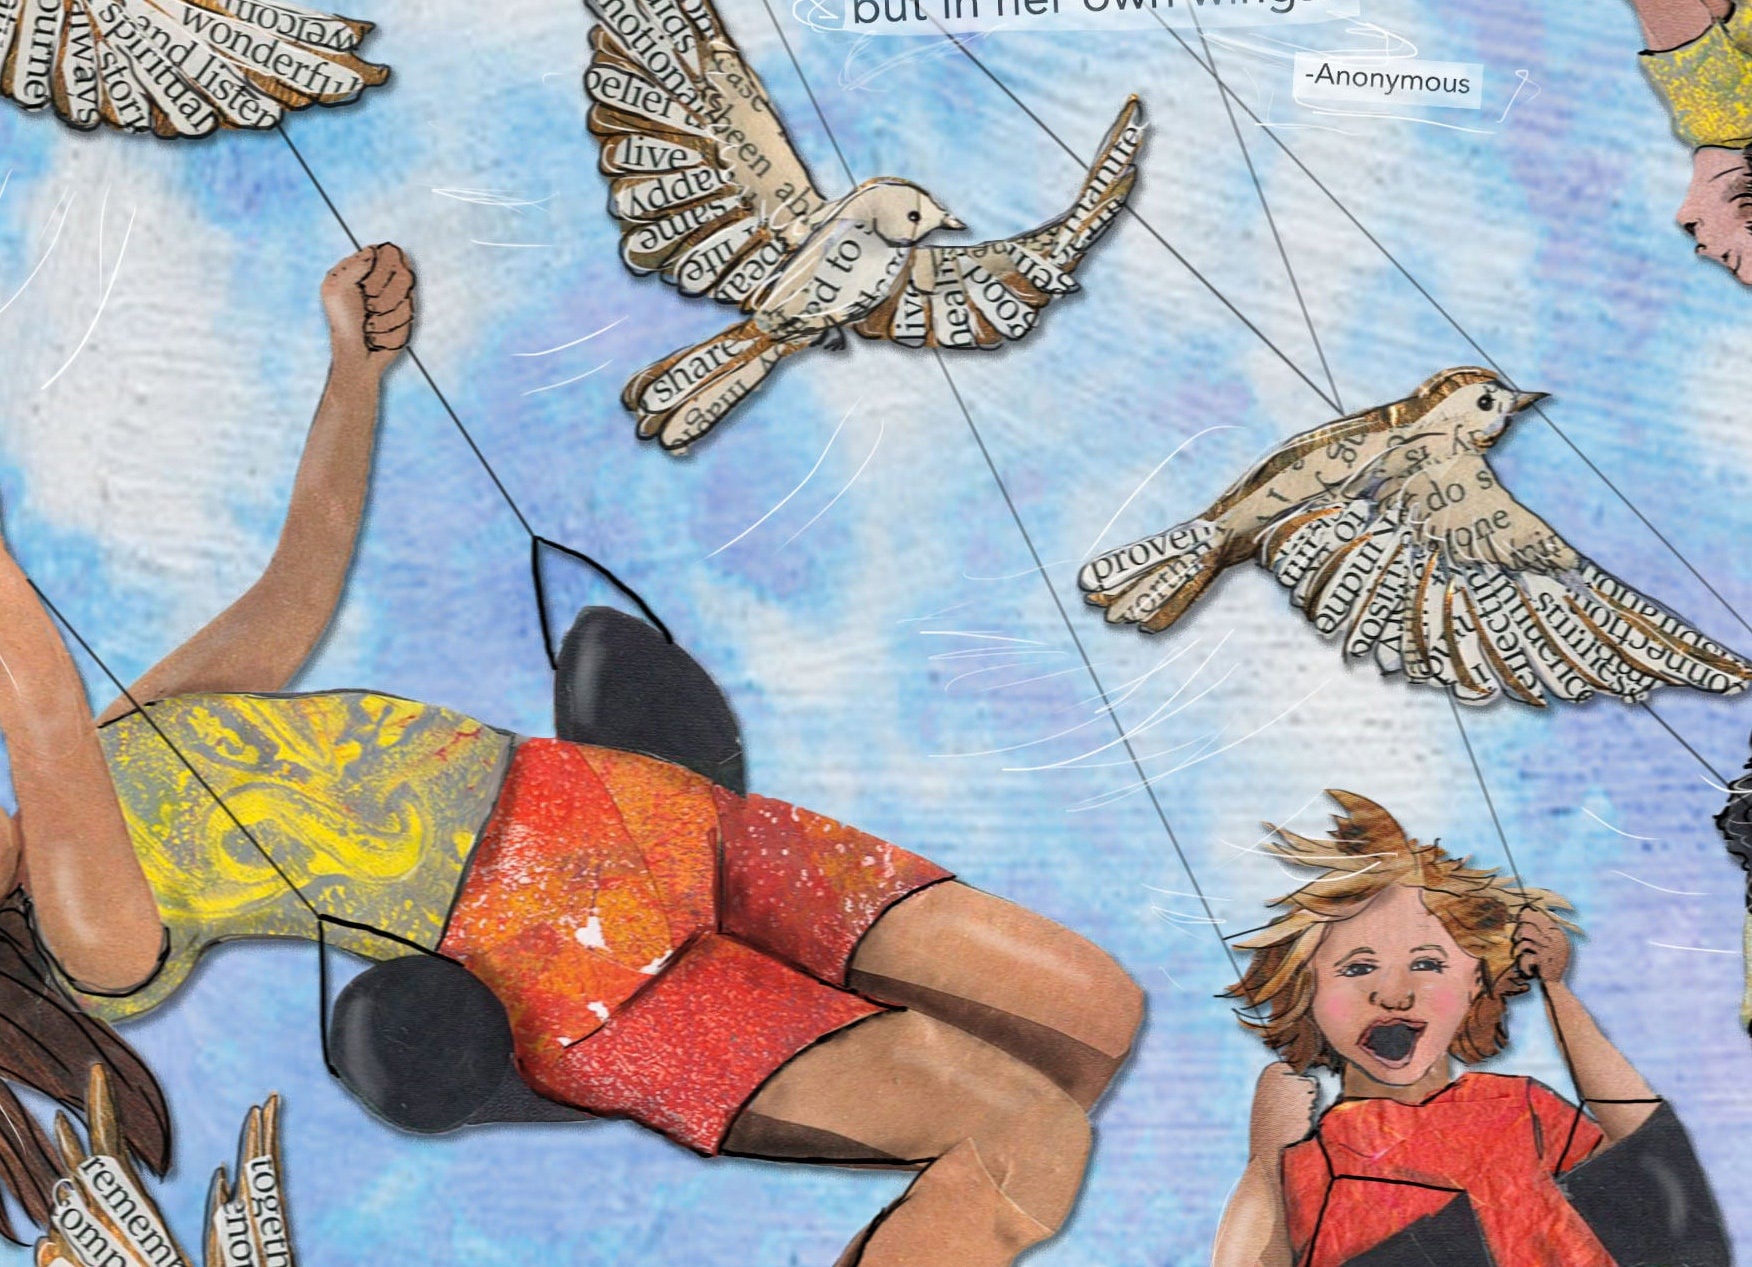 8x10 Art Print of a mixed media collage of children swinging in the air with birds flying around them, inspirational quote